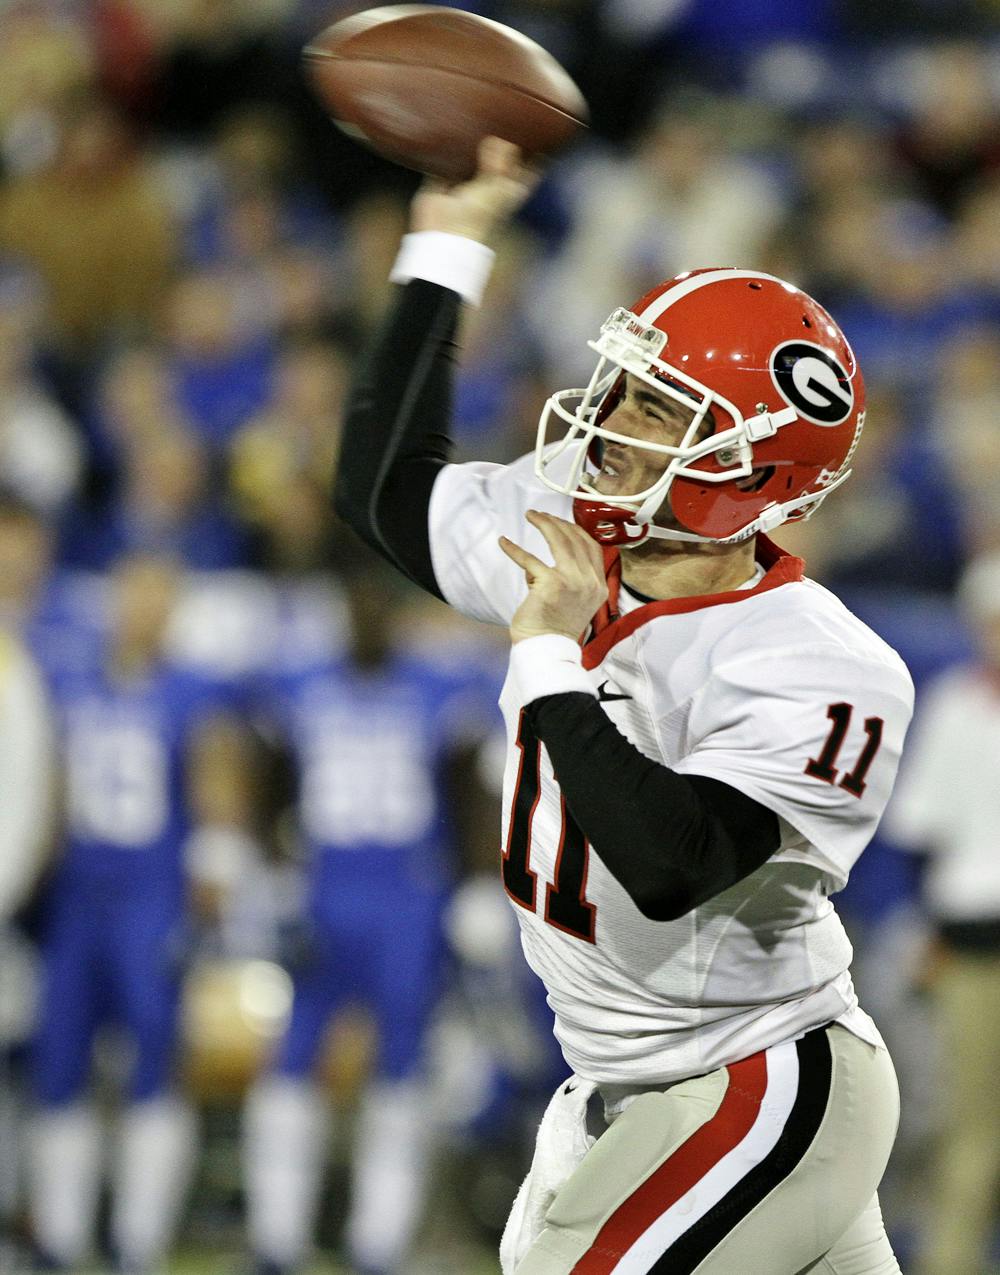 <p>Georgia quarterback Aaron Murray (11) attempts a pass during the first half against Kentucky on Oct. 20, 2012, in Lexington, Ky.</p>